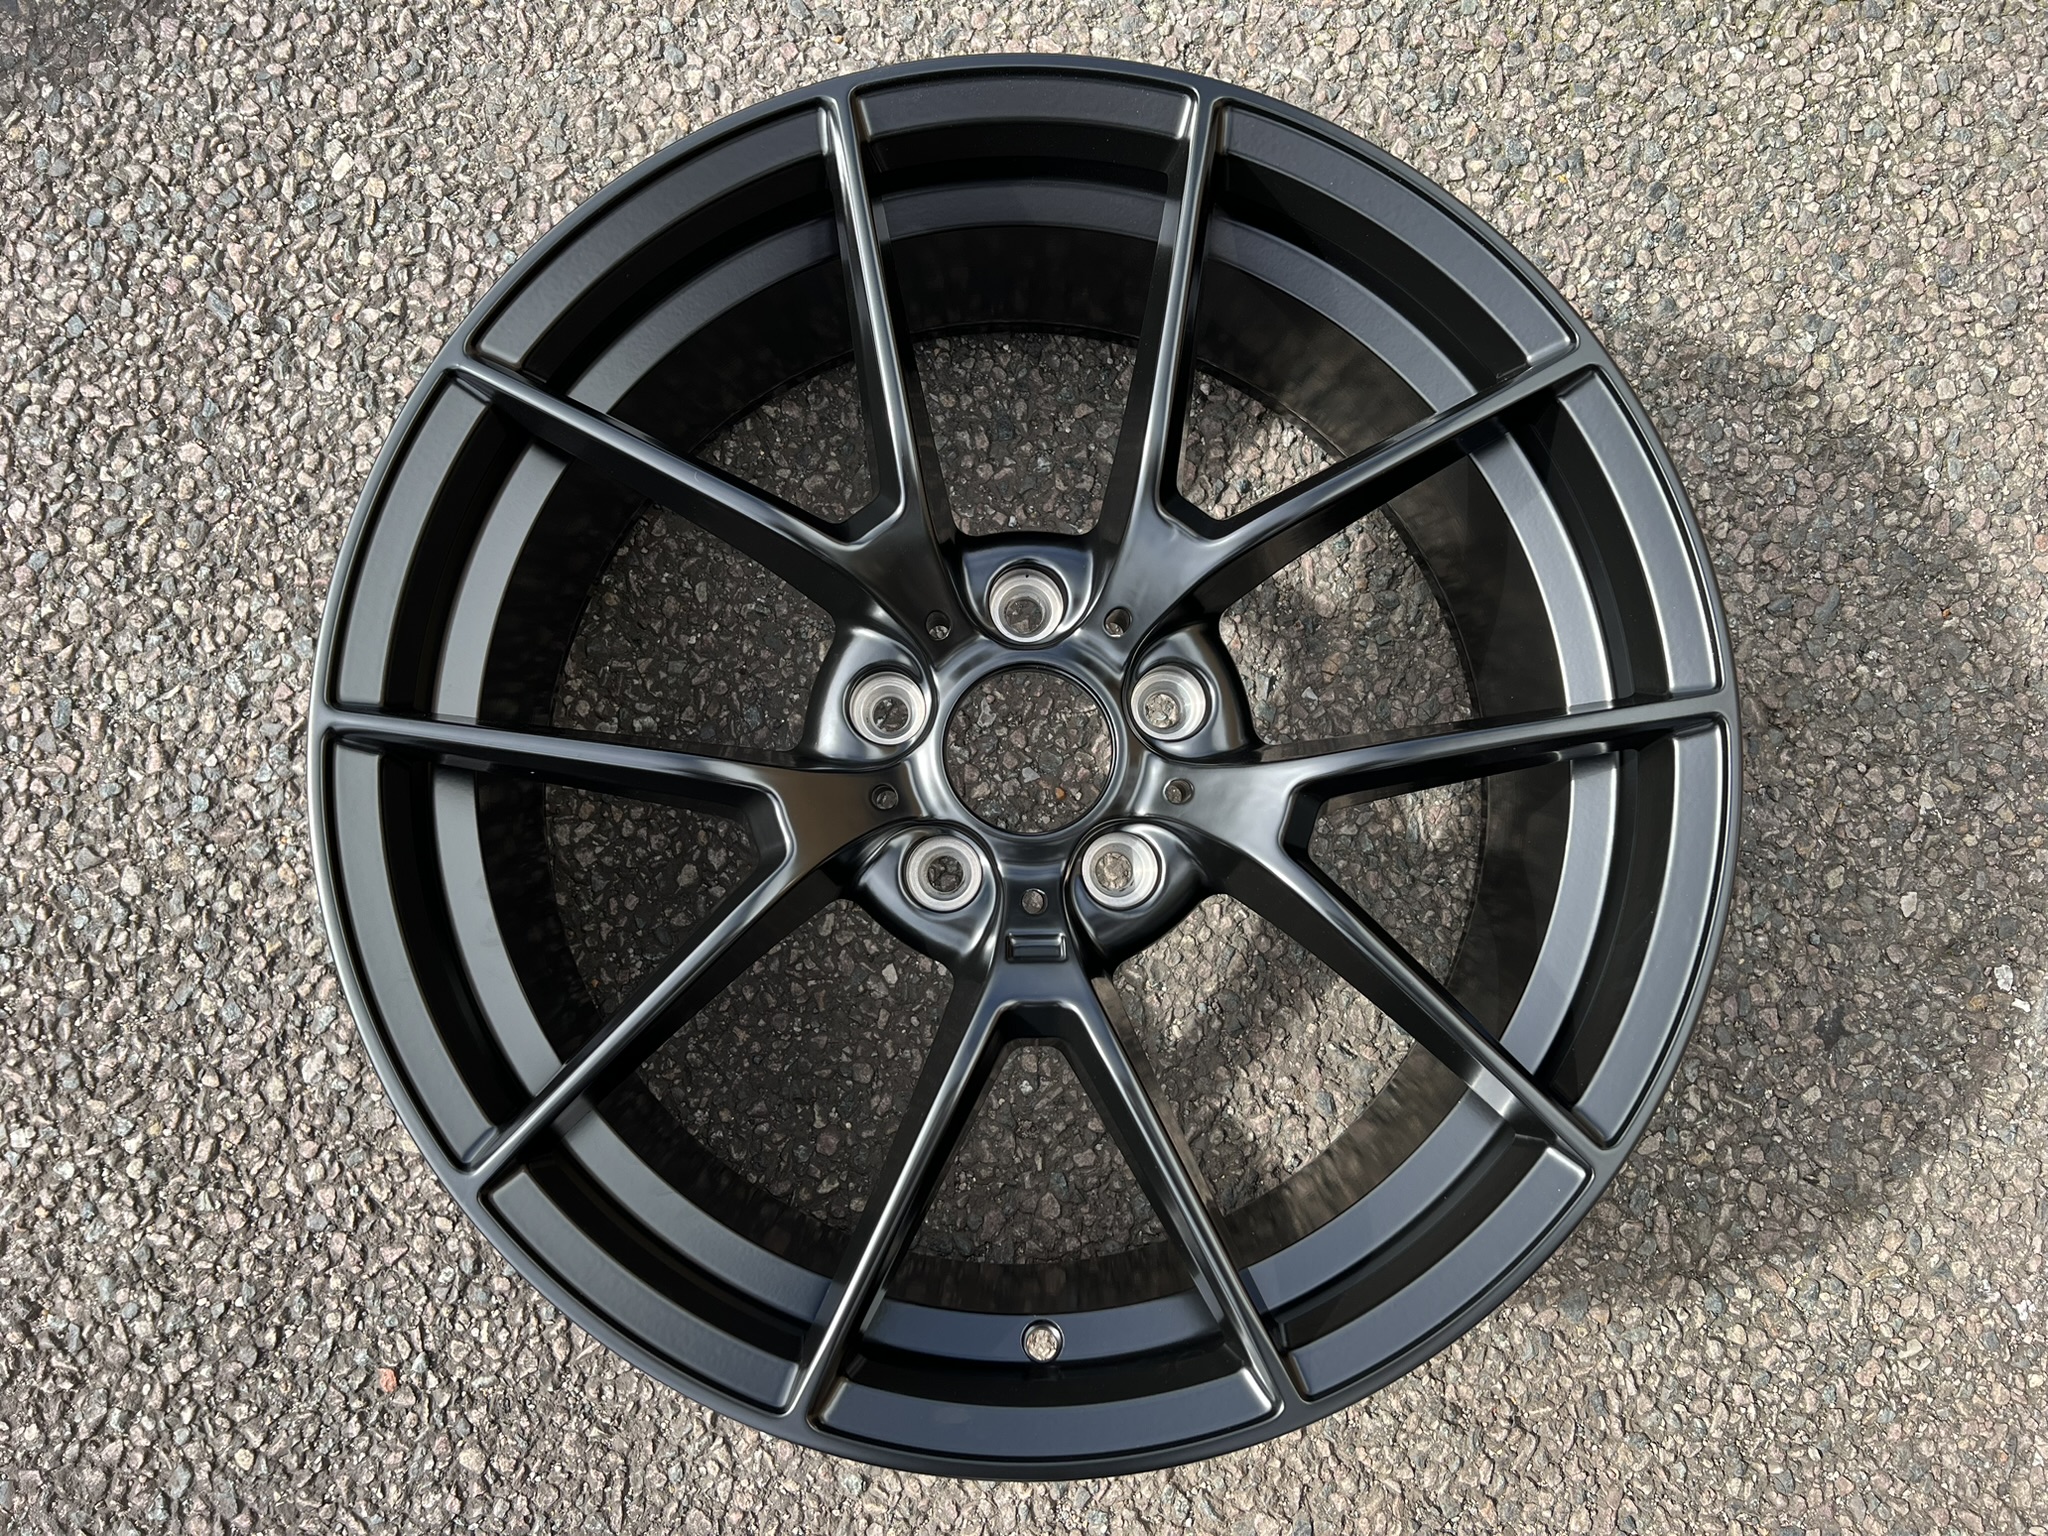 NEW 20" CS STYLE ALLOY WHEELS IN SATIN BLACK, WIDER 9.5" REARS